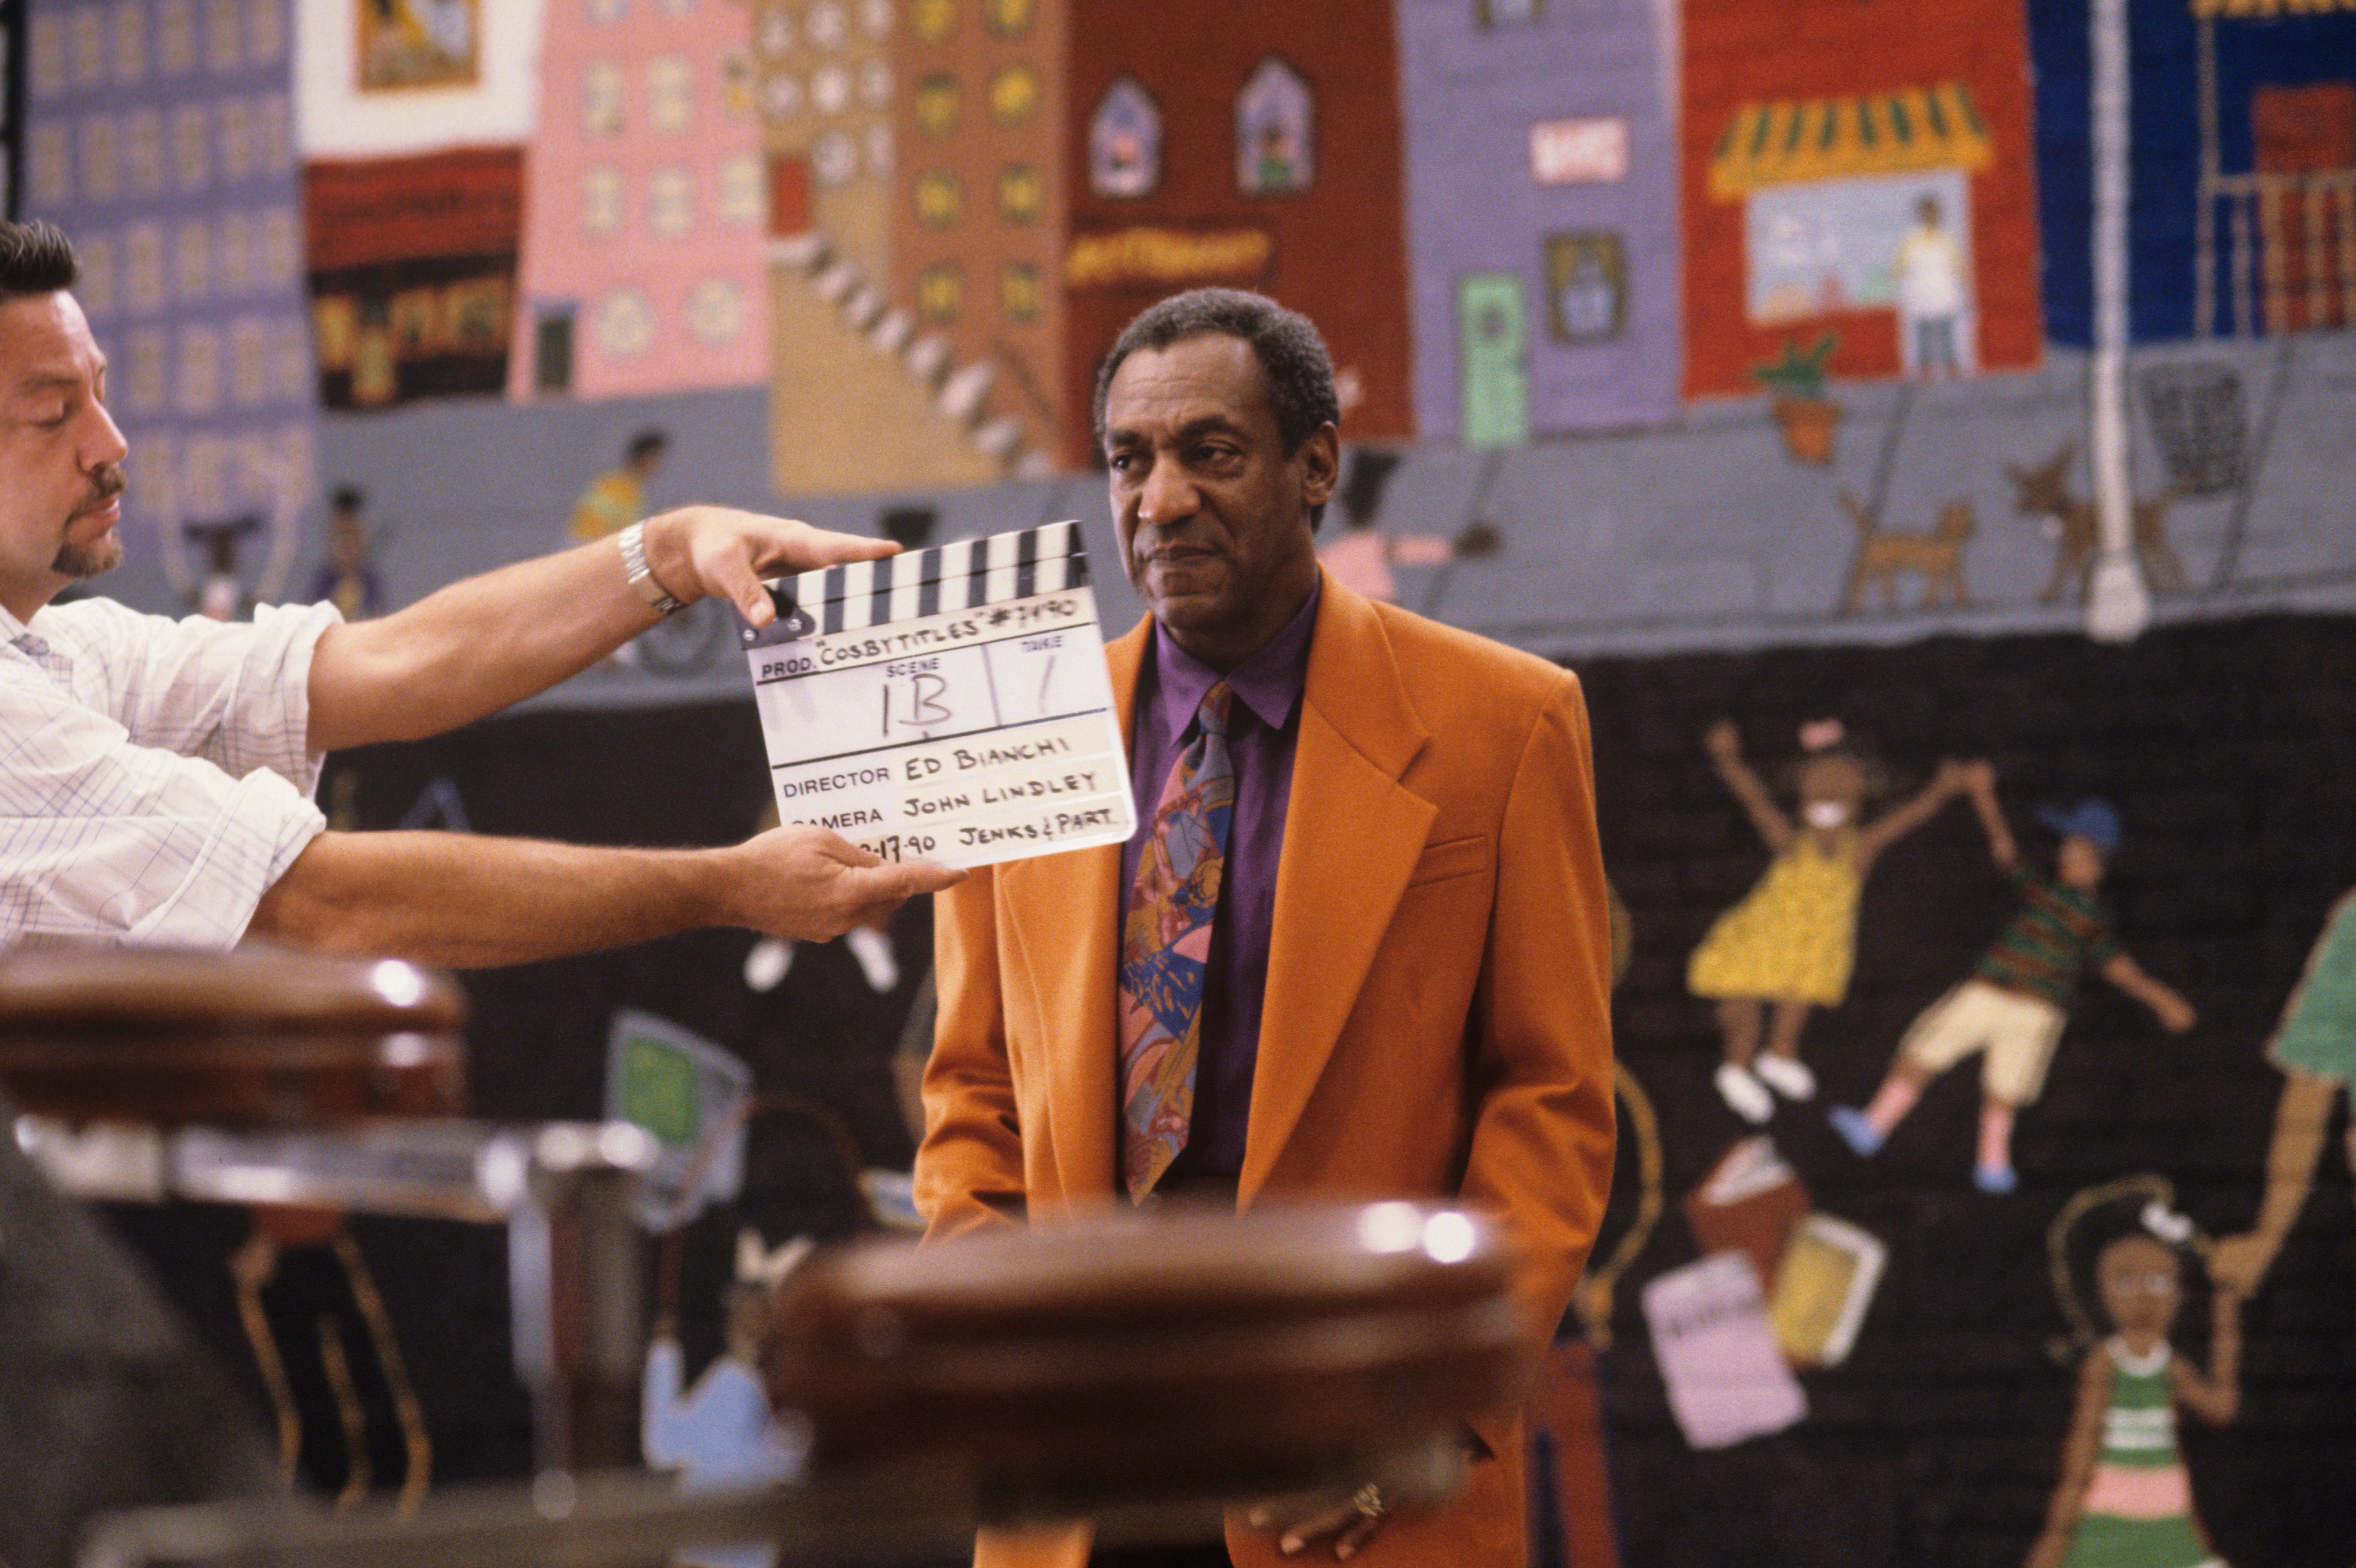 Bill Cosby prepares to film the new opening sequence for "The Cosby Show's" seventh season at Kaufman-Astoria Studios in New York in August 1990 | Photo: Joe McNally/Getty Images